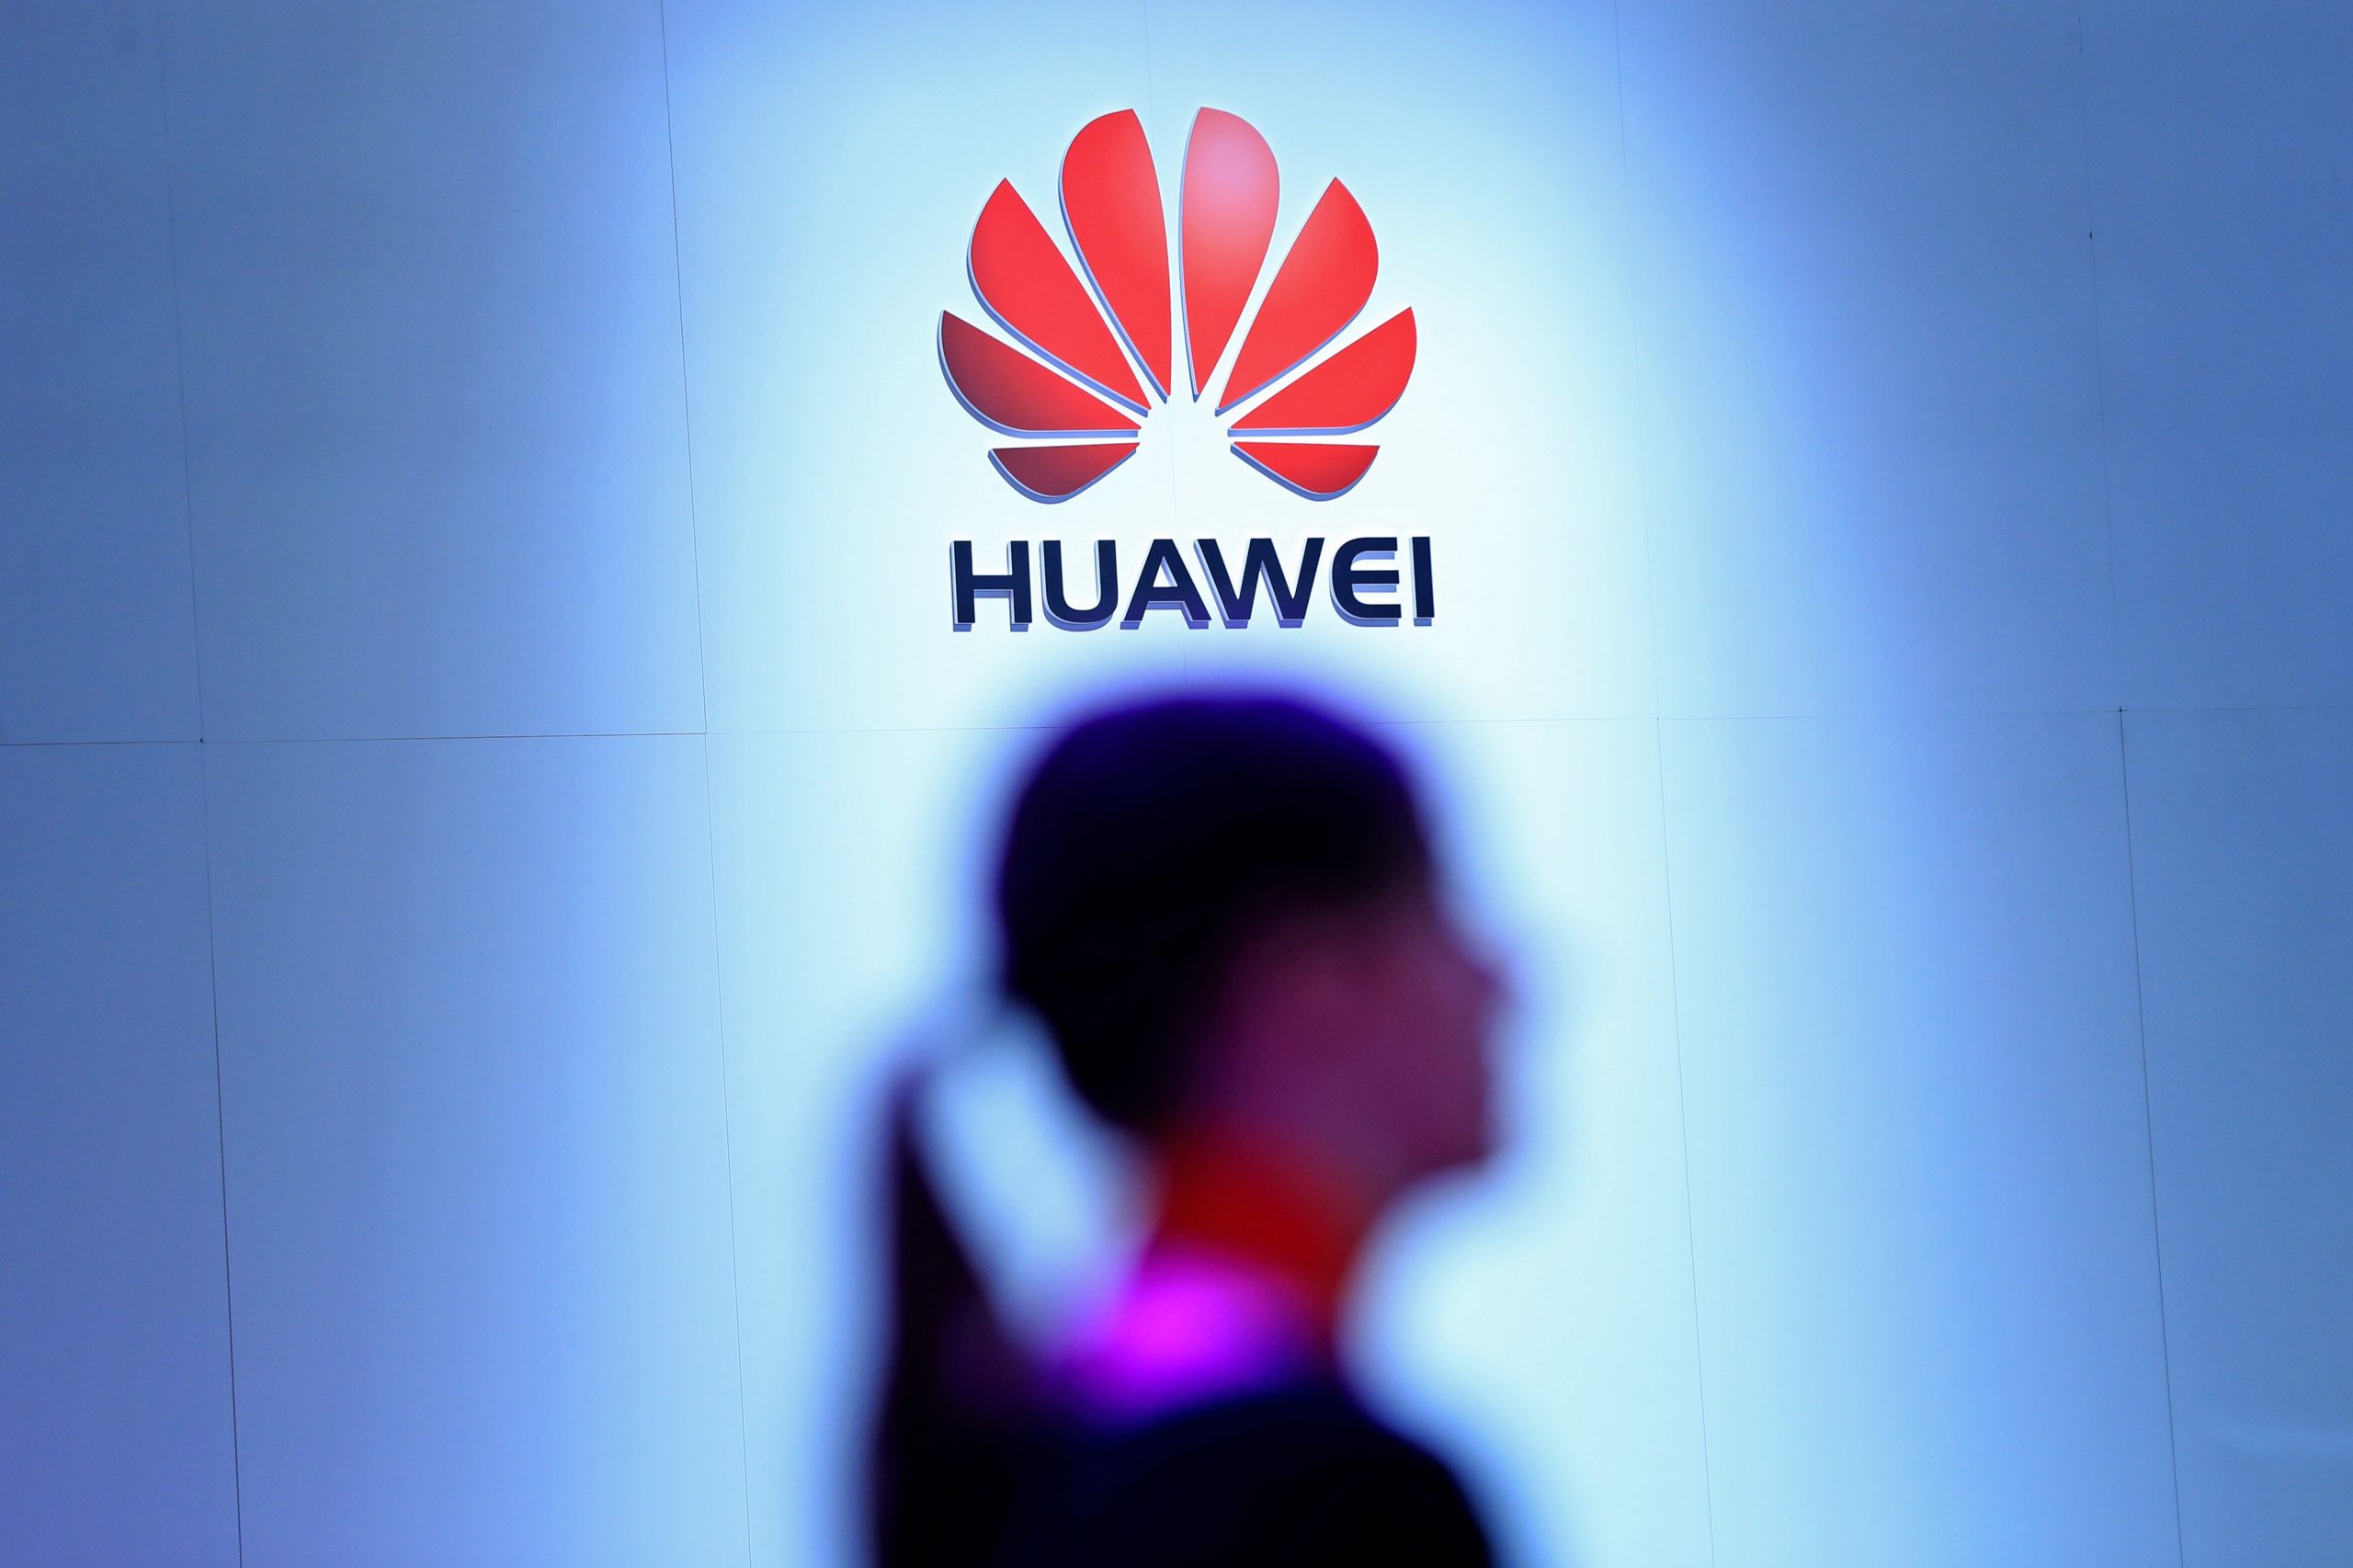 Huawei and ZTE are banned from 5G mobile networks in Sweden